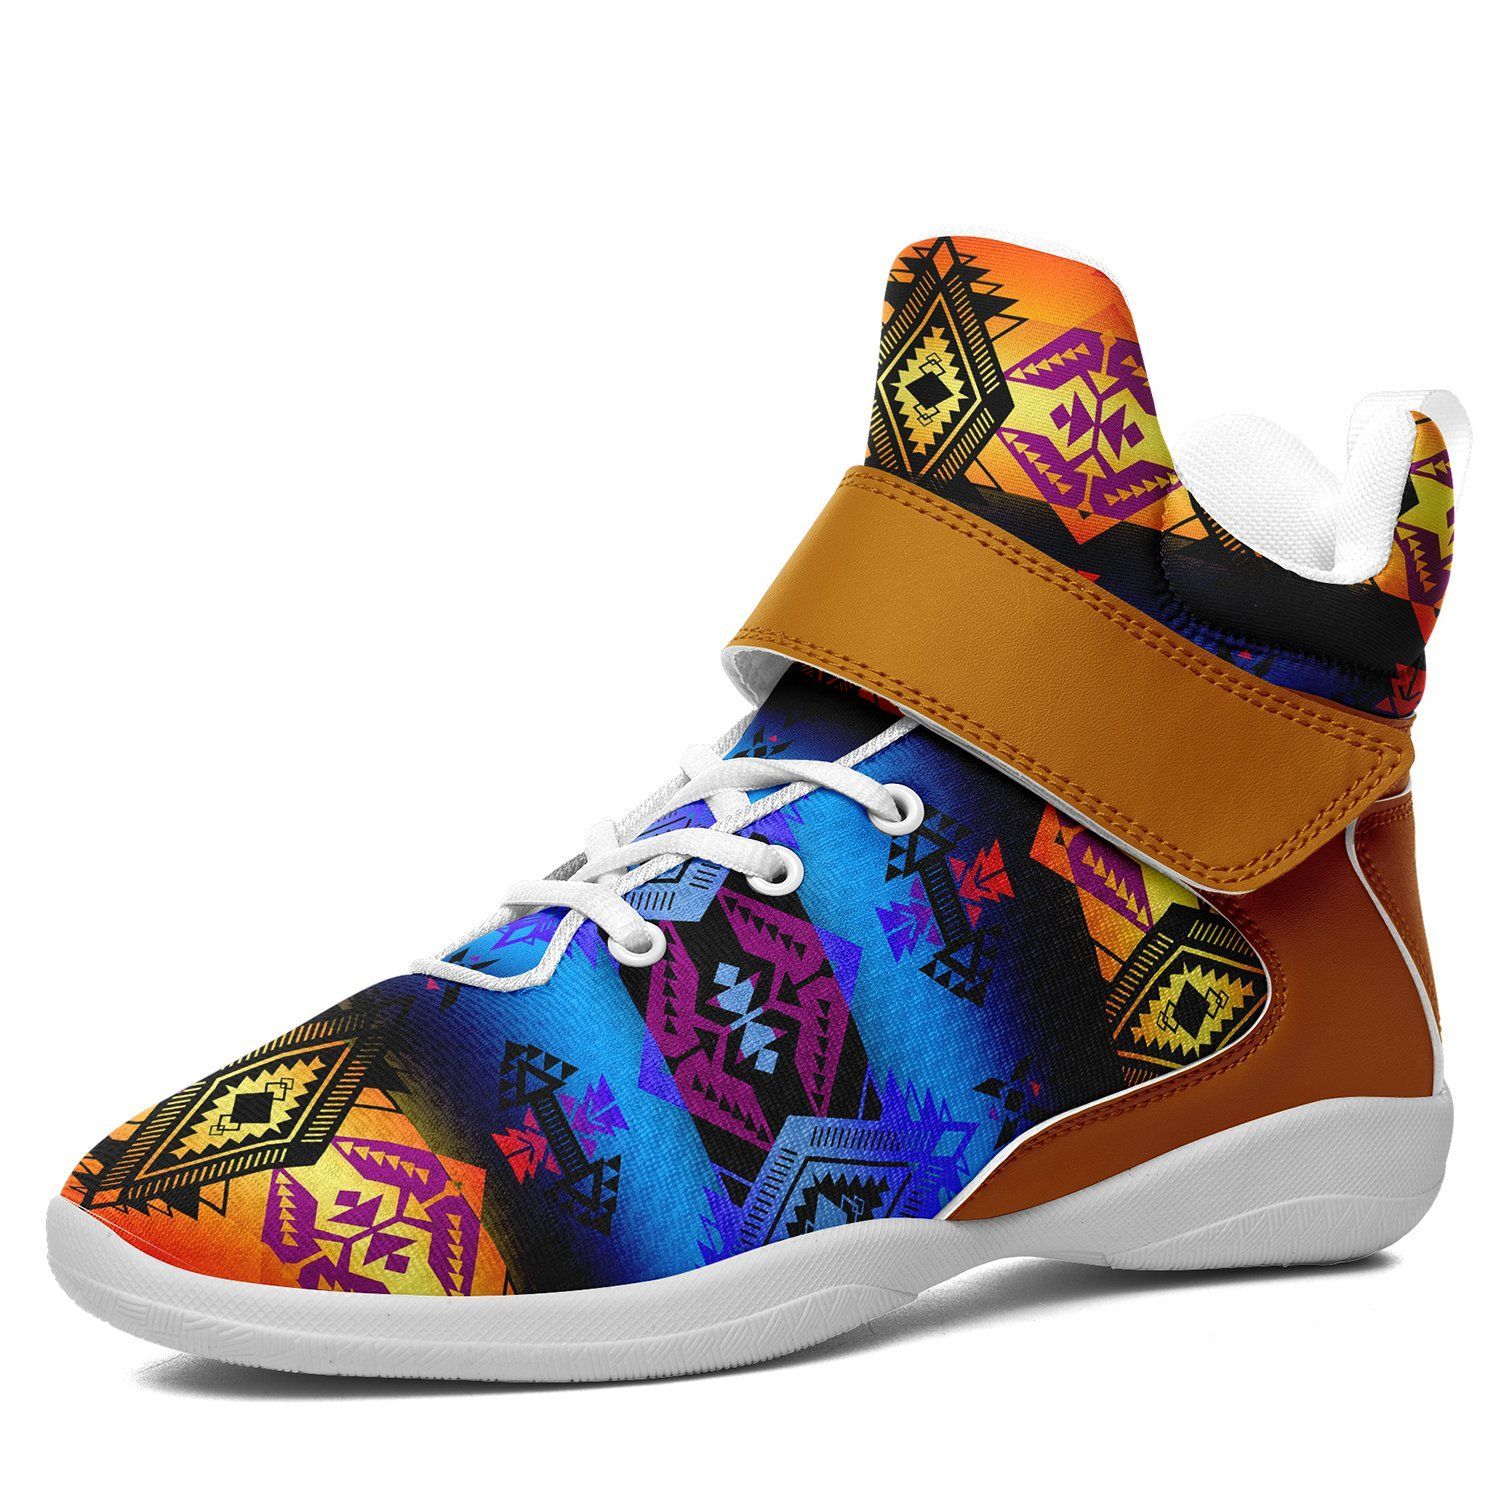 Sovereign Nation Sunset Ipottaa Basketball / Sport High Top Shoes - White Sole 49 Dzine US Men 7 / EUR 40 White Sole with Brown Strap 